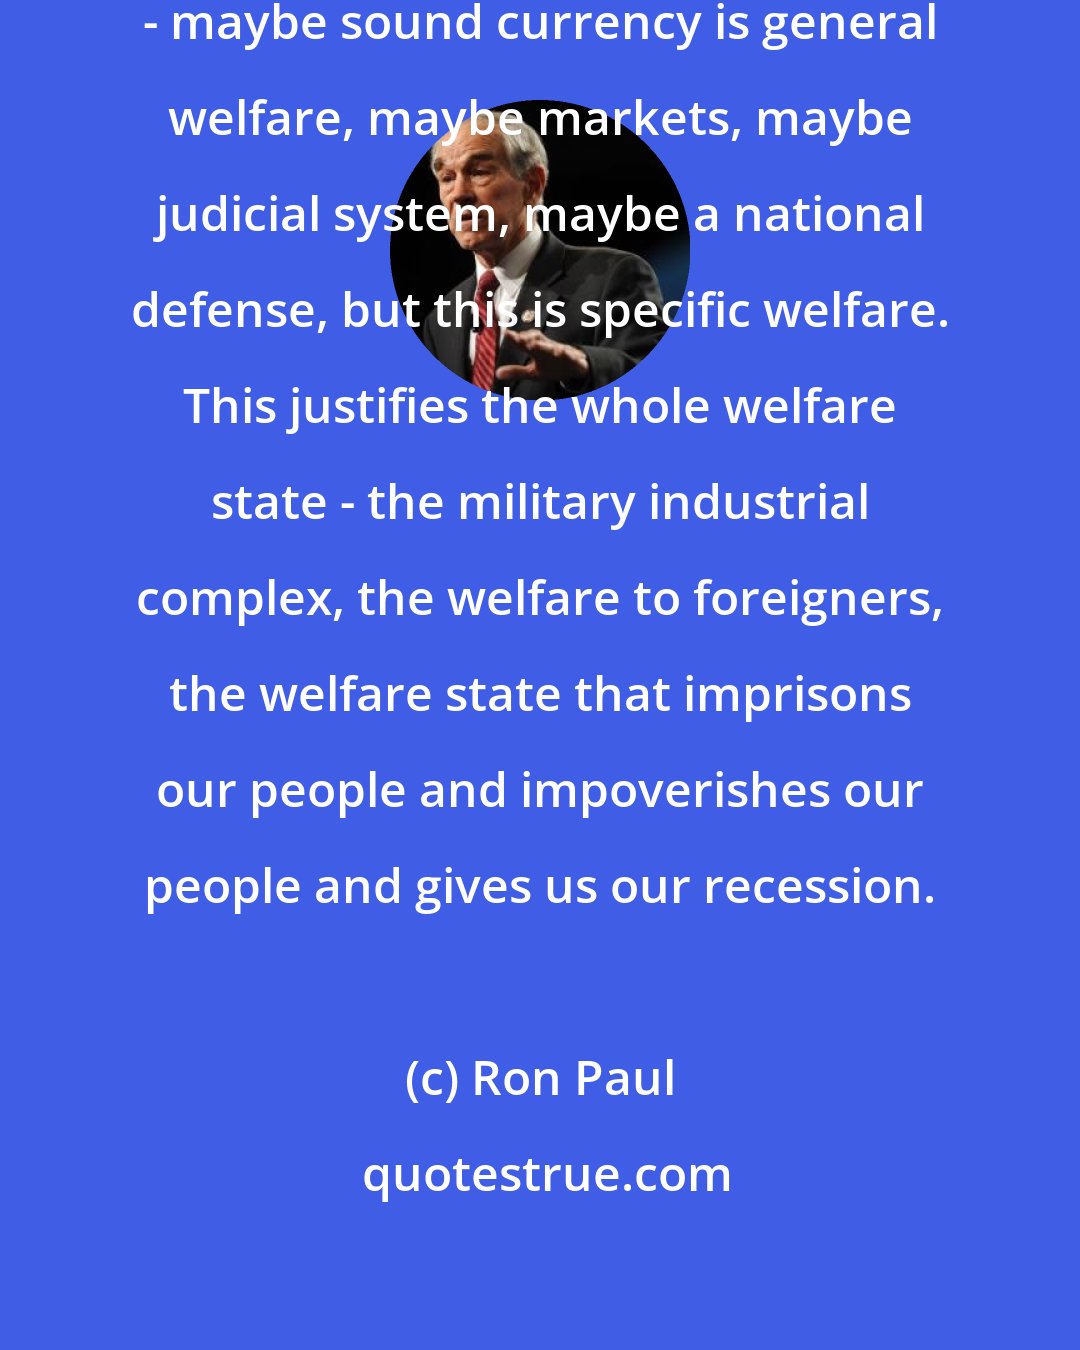 Ron Paul: General welfare is a general condition - maybe sound currency is general welfare, maybe markets, maybe judicial system, maybe a national defense, but this is specific welfare. This justifies the whole welfare state - the military industrial complex, the welfare to foreigners, the welfare state that imprisons our people and impoverishes our people and gives us our recession.